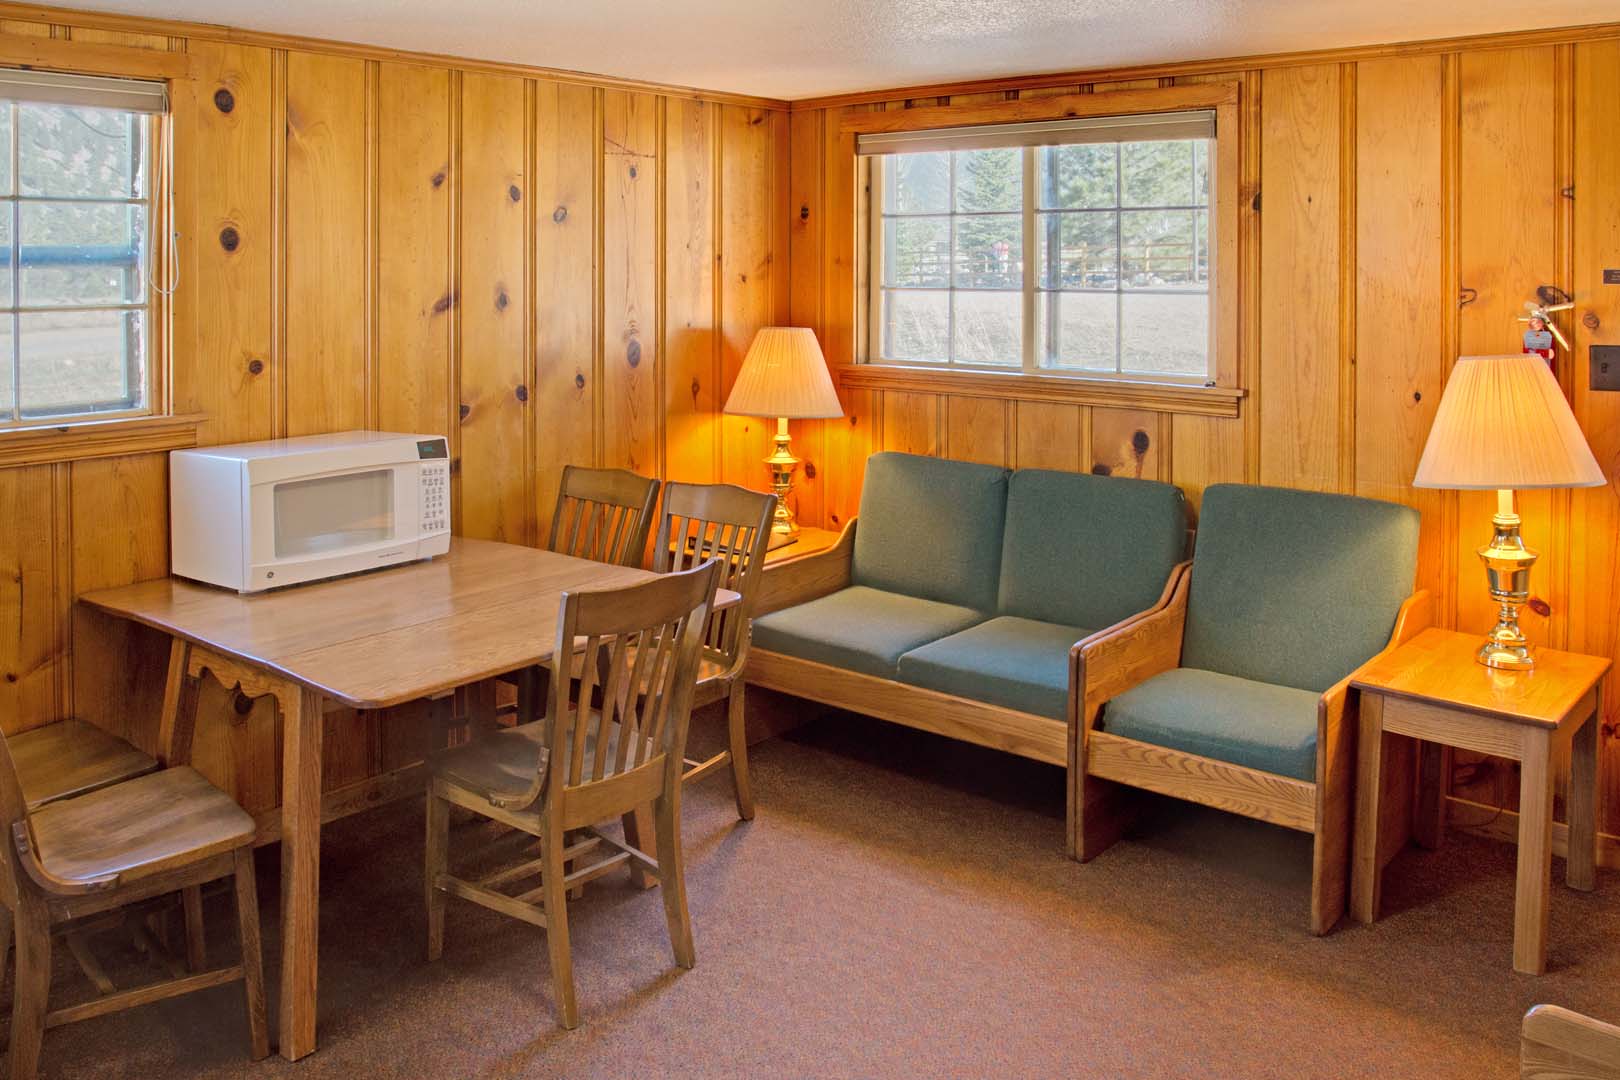 Seating area inside cabin